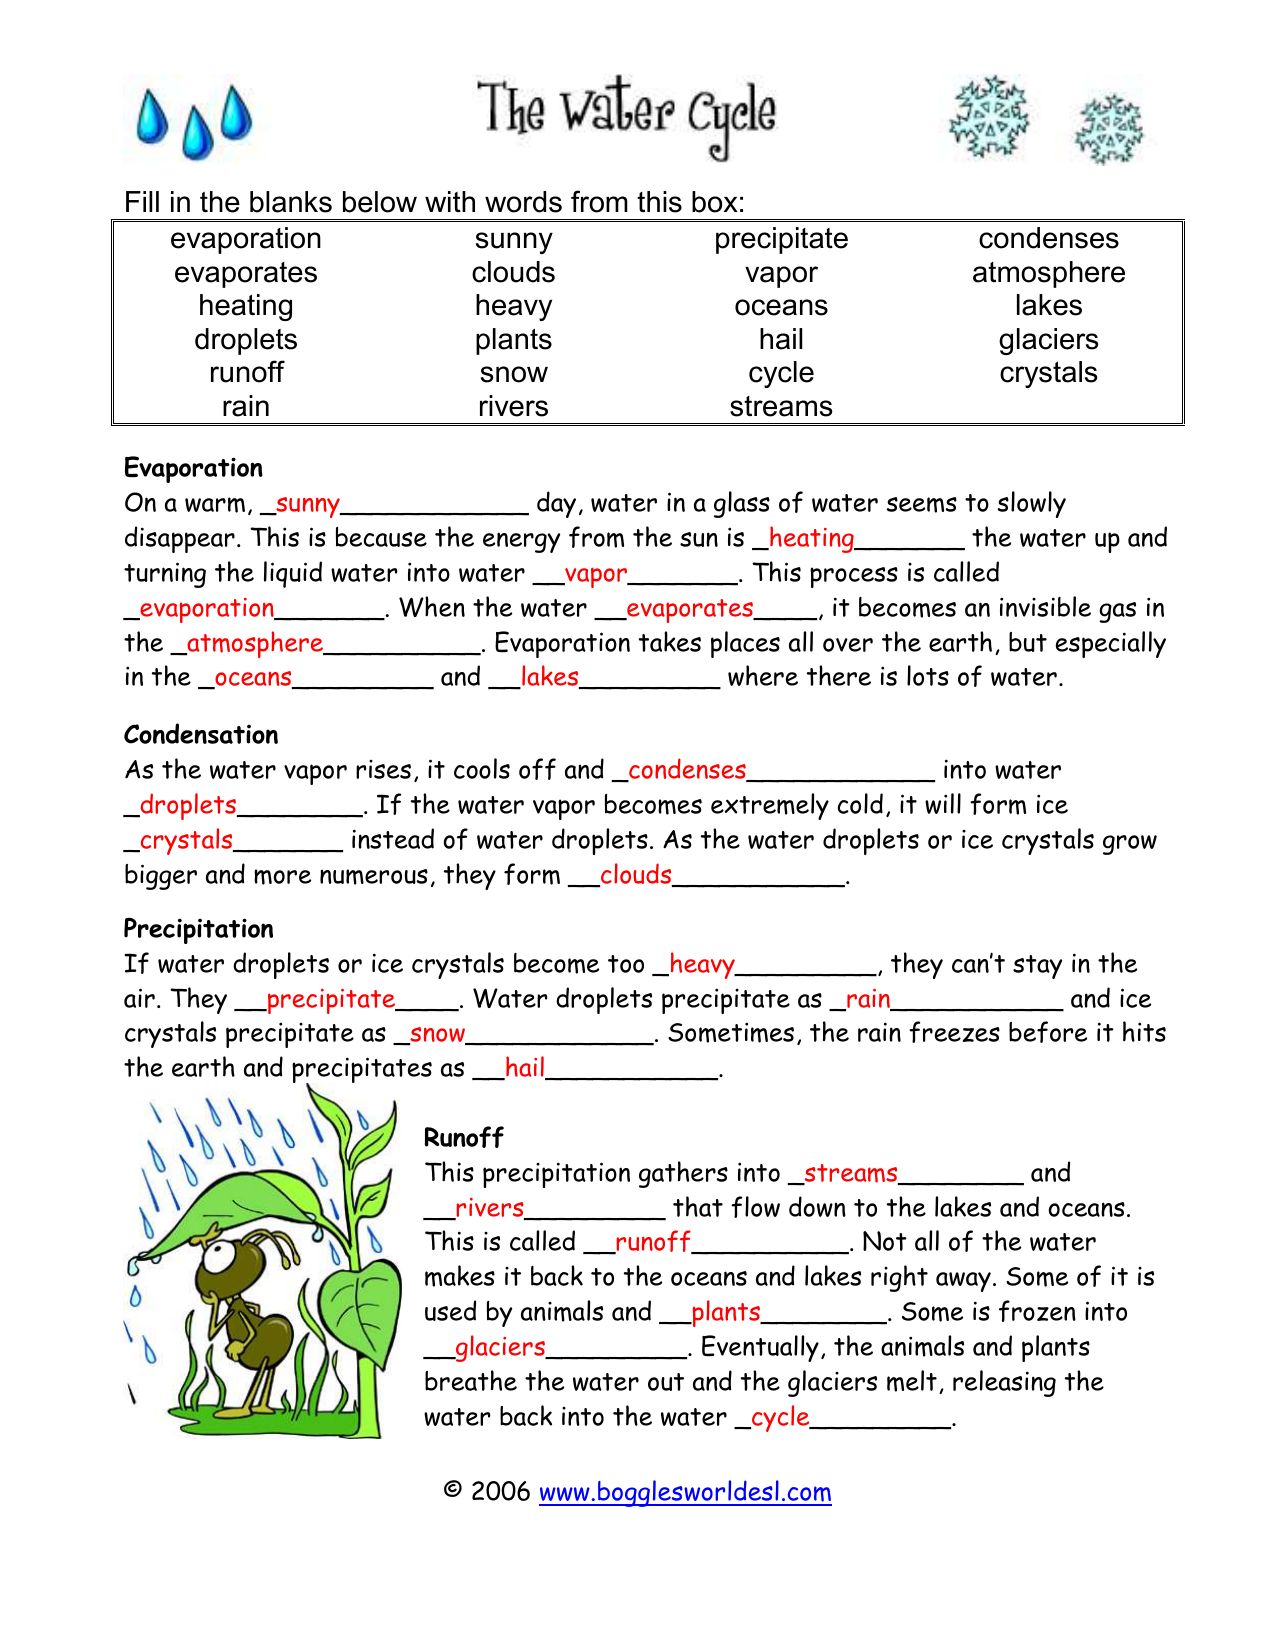 Water Cycle Cloze and Crossword KEY Intended For The Water Cycle Worksheet Answers